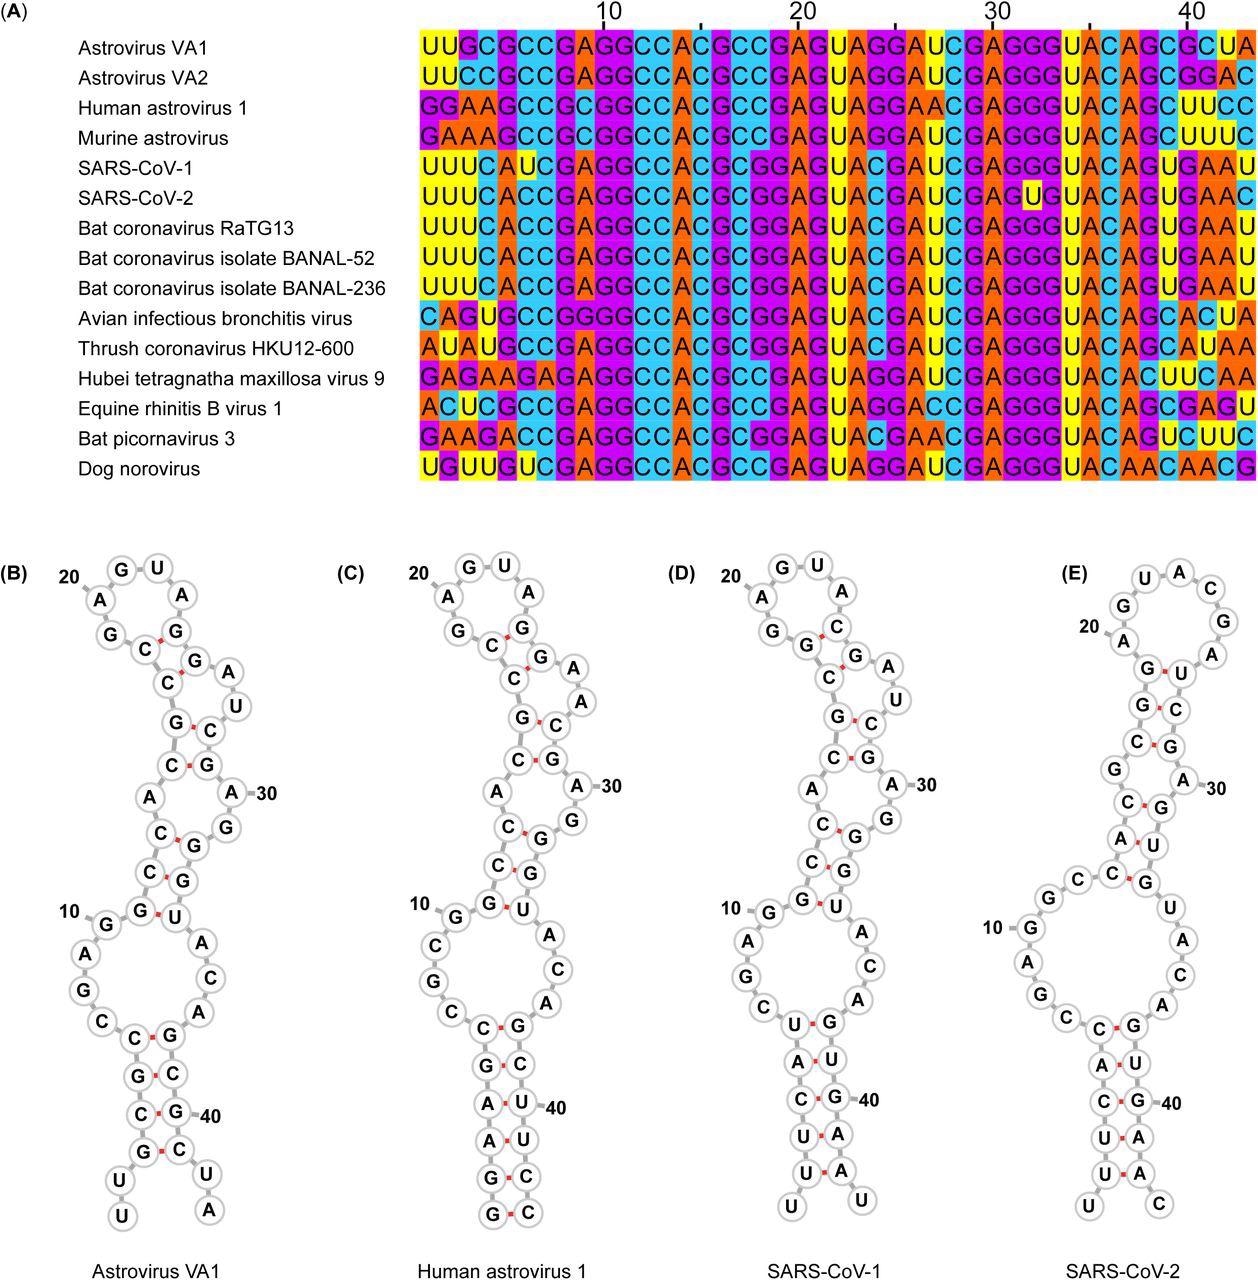 s2m nucleotide sequences and predicted secondary structures. (A) Multiple sequence alignment of representative viruses that encode an s2m. (B-E) Predicted secondary structure of the s2m by RNAfold for (B) Astrovirus VA1, (C) Human astrovirus 1, (D) SARS-CoV-1, (E) SARS-CoV-2